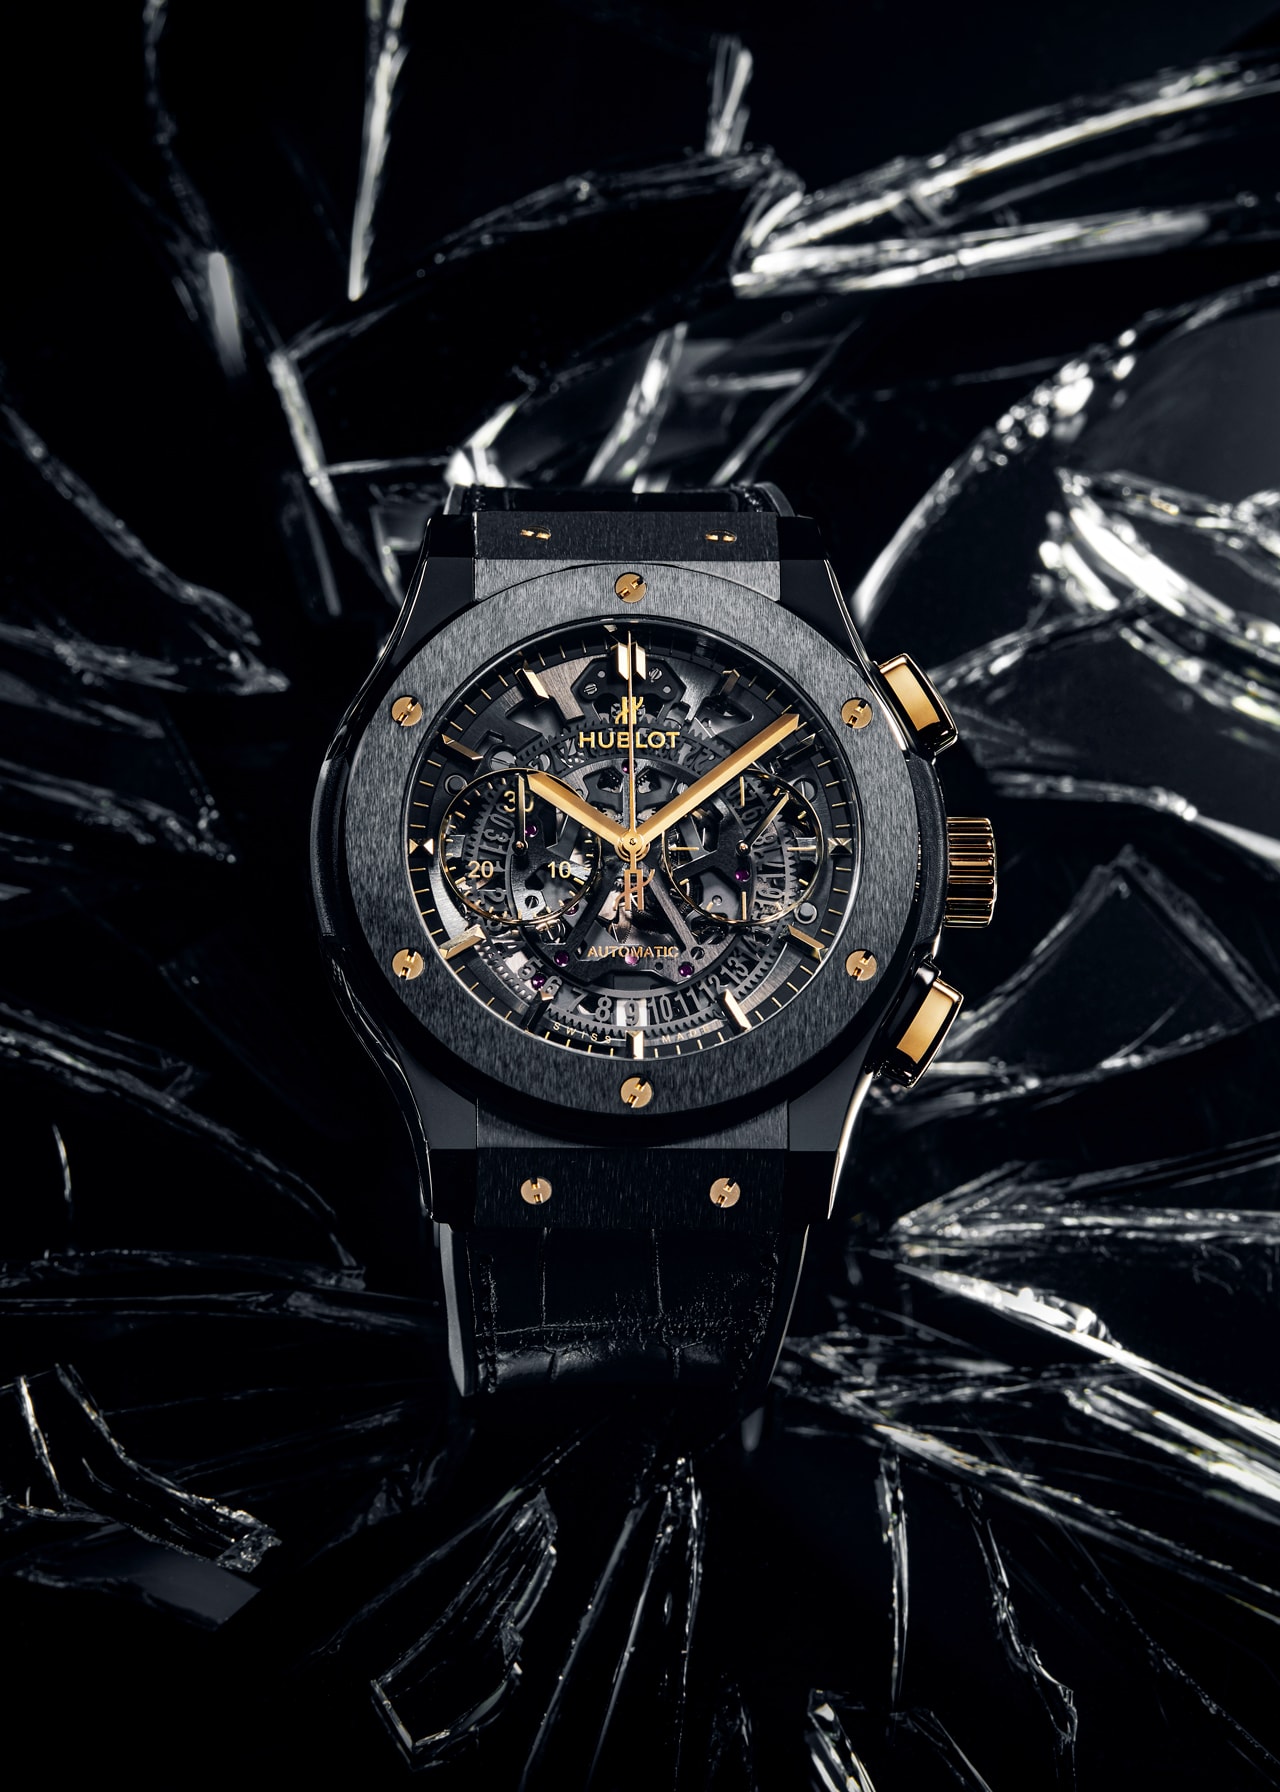 Hublot South East Asia Special Edition Watches Big Bang references (44 mm, 41 mm and 38 mm), the Classic Fusion 45 mm Aerofusion Chronograph Ceramic and the Spirit of Big Bang 42 mm